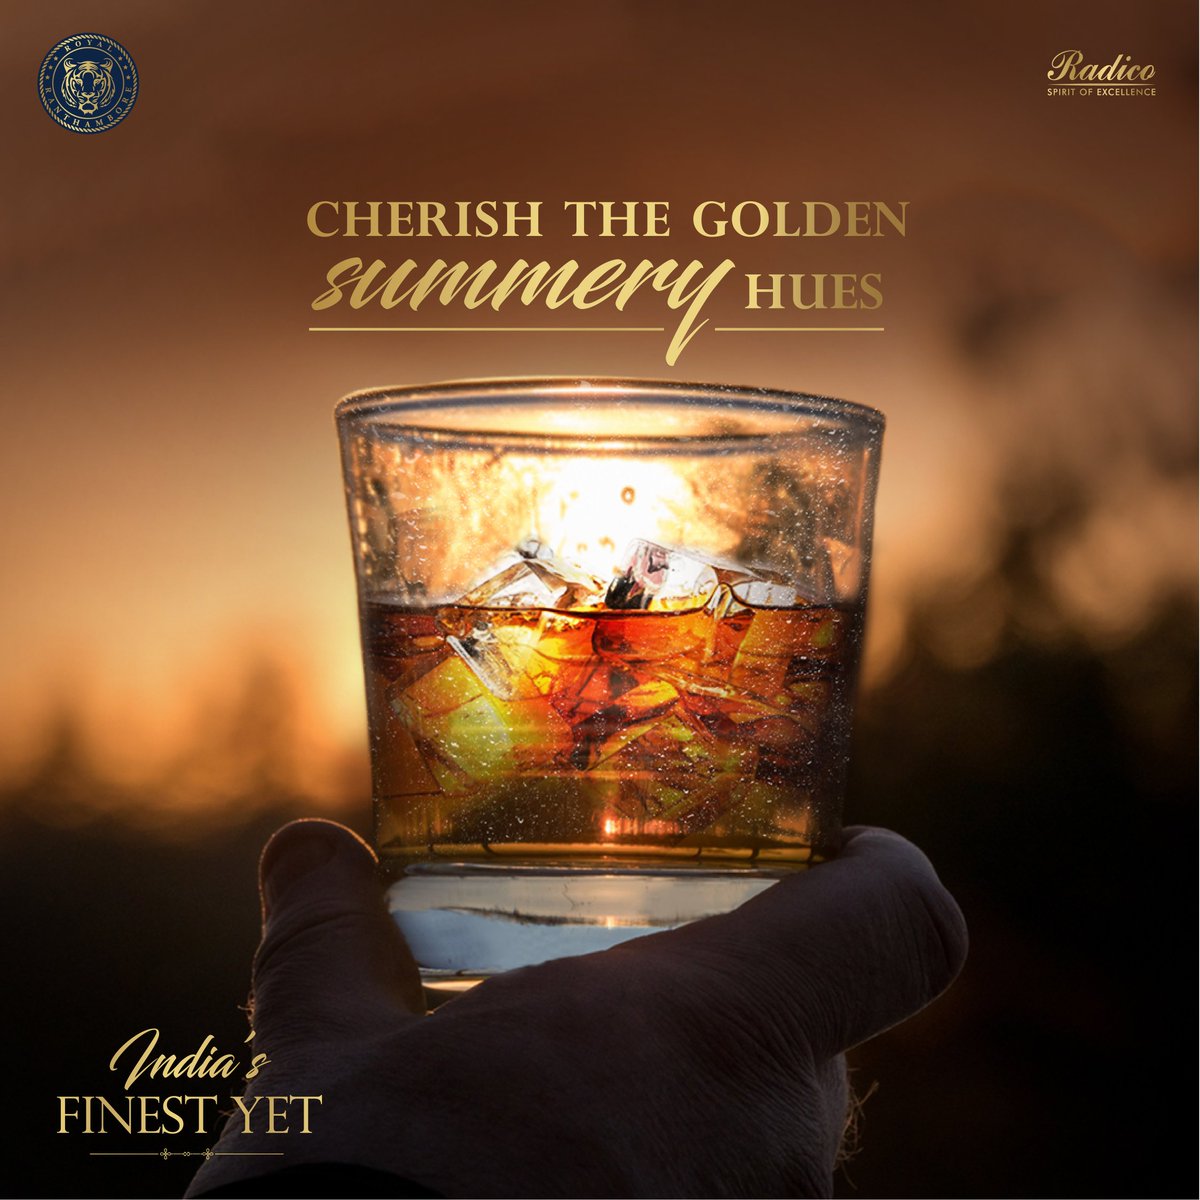 Rejoice in the warmth of this season with India’s Finest blend by your side, meticulously crafted to immerse your senses in a royal symphony of flavors and aromas. #Radico #RoyalRanthambore #Summer #IndiasFinestYet #RoyalBlend